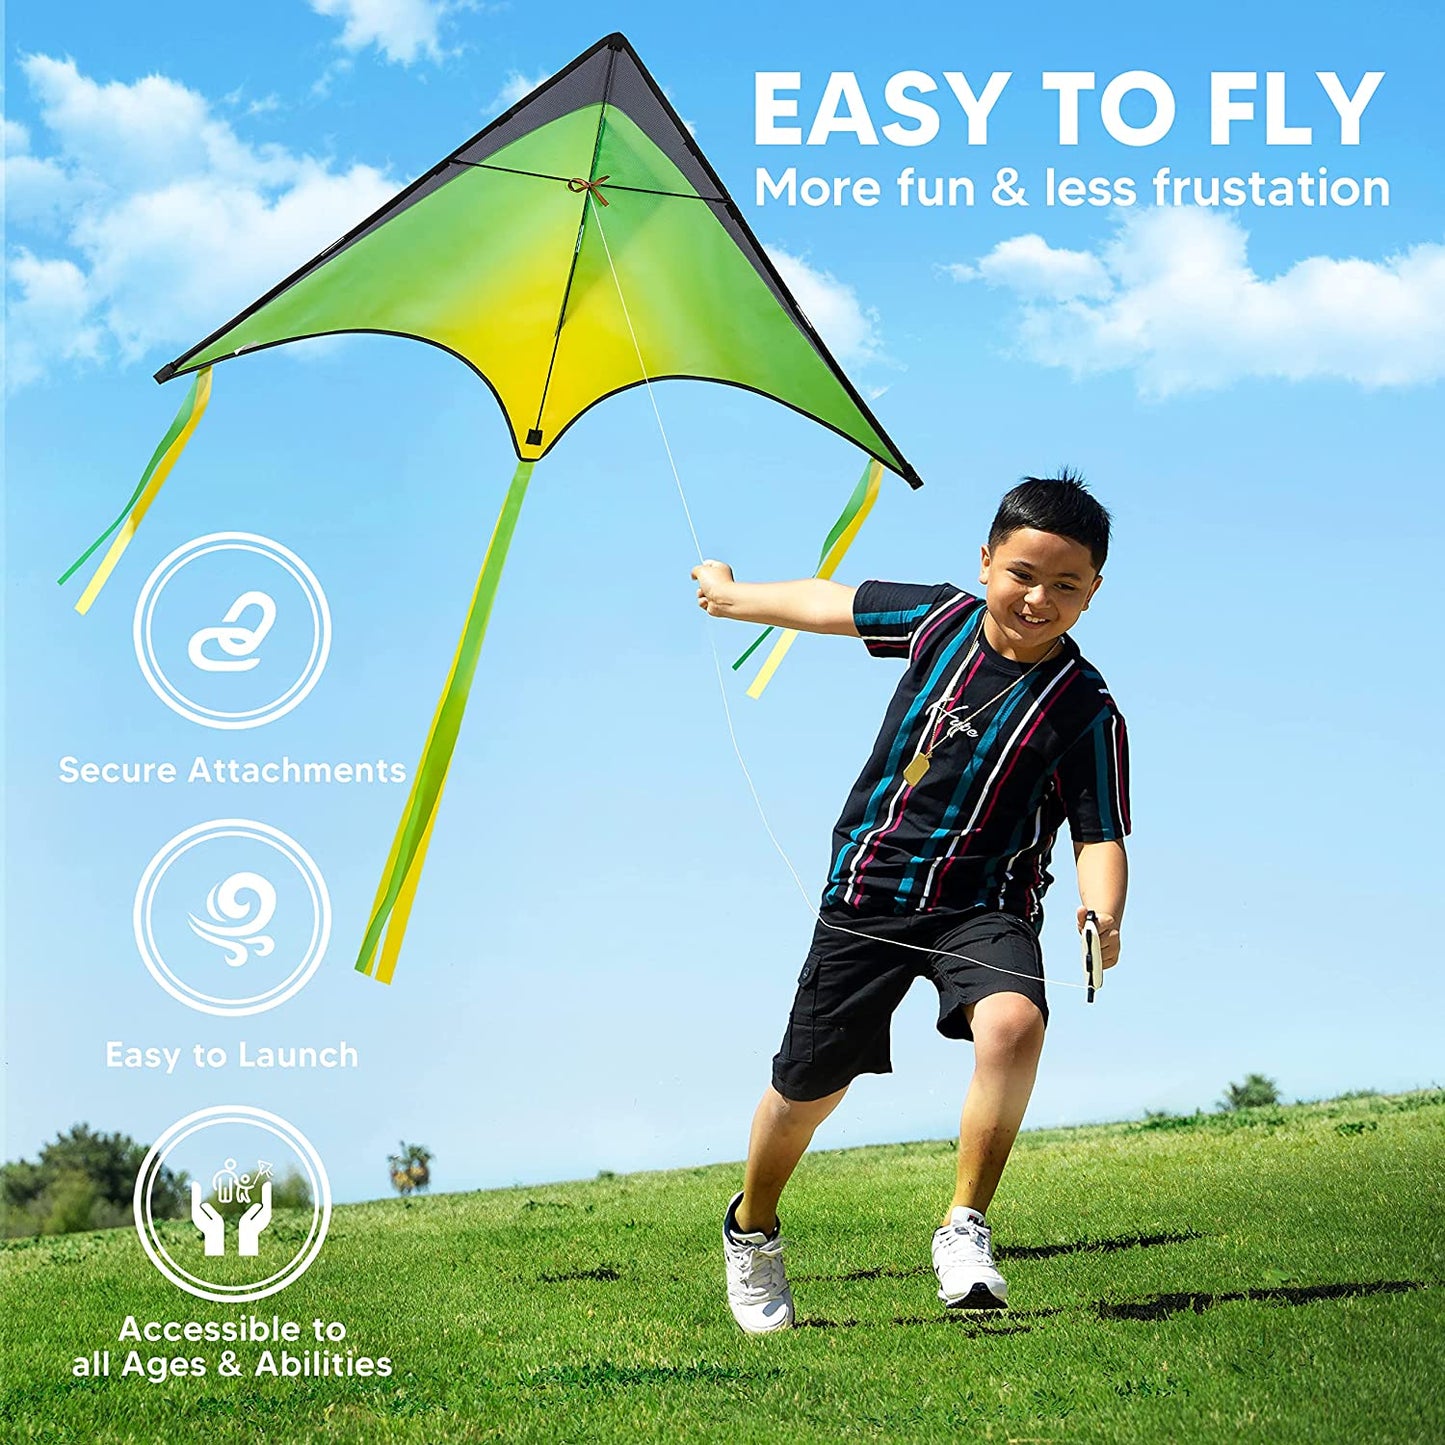 3 Packs Large Delta Kite Orange, Green and Purple, Easy to Fly Huge Kites for Kids and Adults with 262.5 Ft Kite String, Large Delta Beach Kite for Outdoor Games and Activities